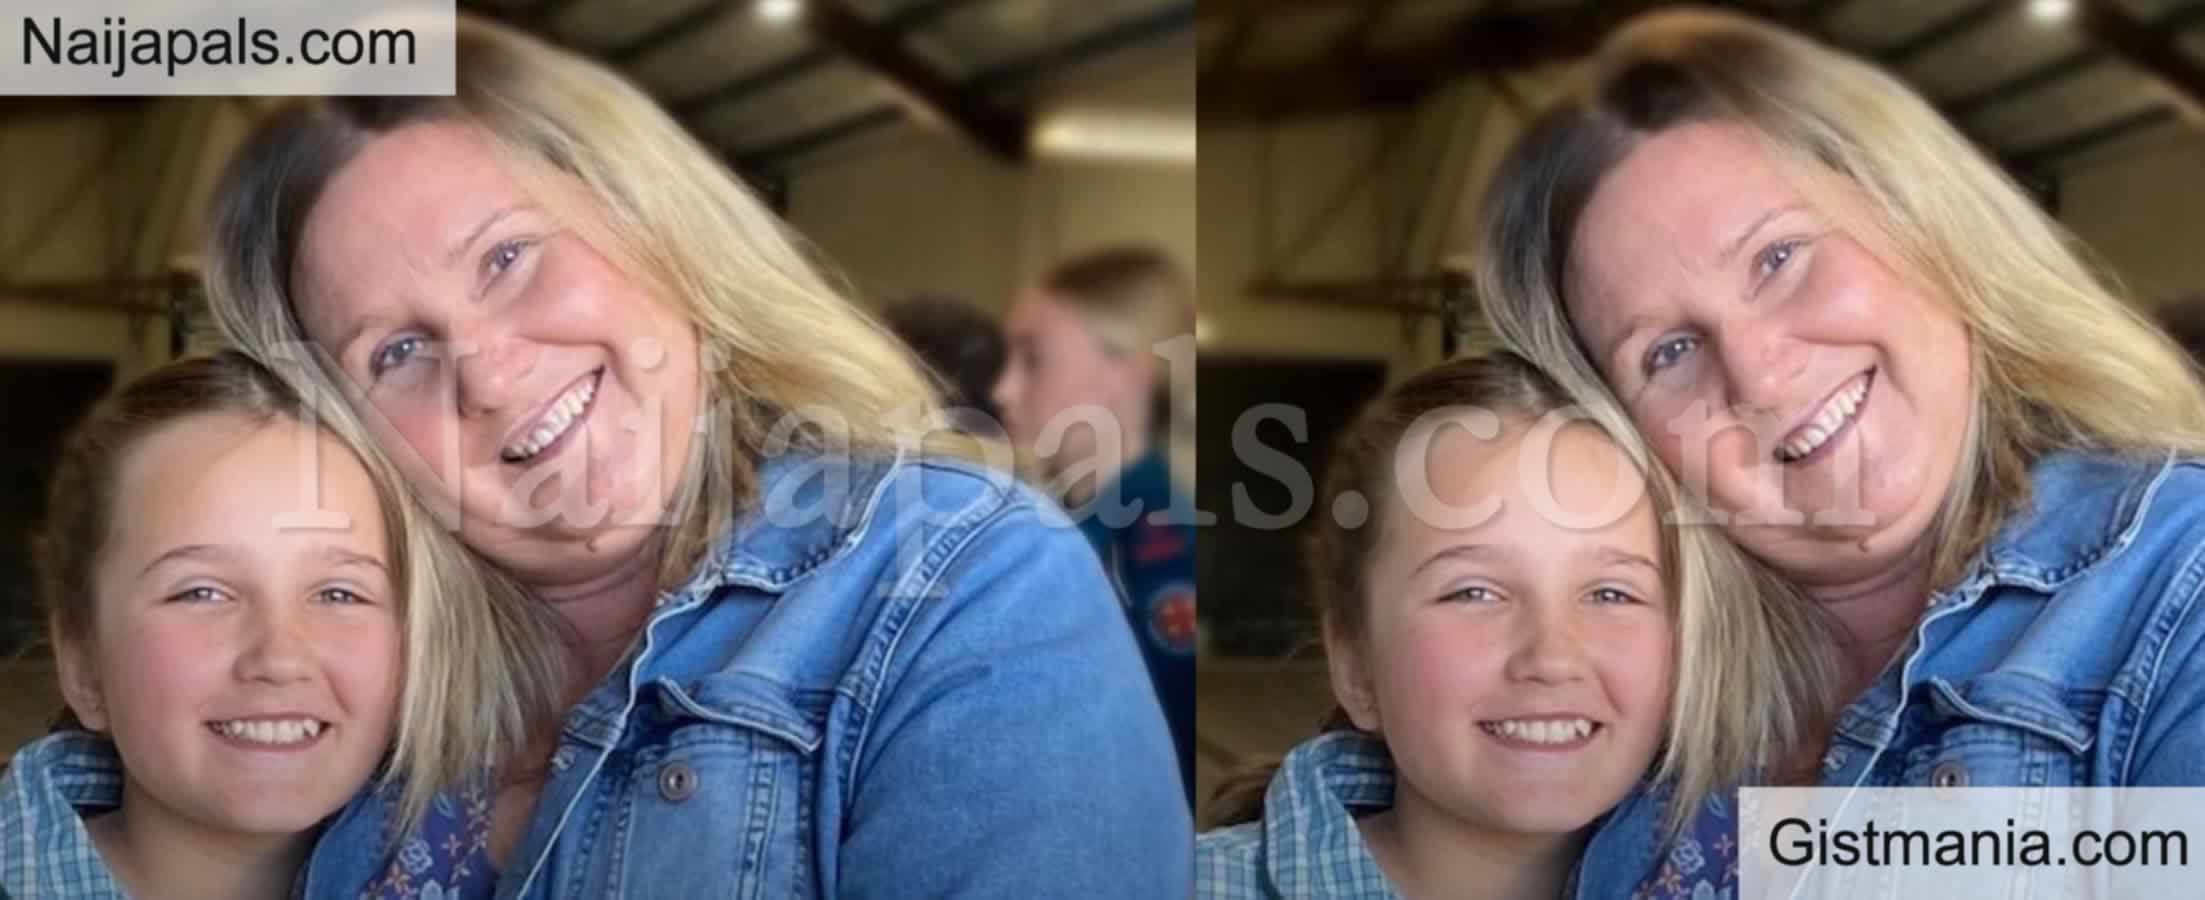 <img alt='.' class='lazyload' data-src='https://img.gistmania.com/emot/thumbs_up.gif' /> <b>Heroic 9-Year-Old Girl Saves Her Mother's Life By Giving CPR For 20 Minutes After She Collapsed</b>